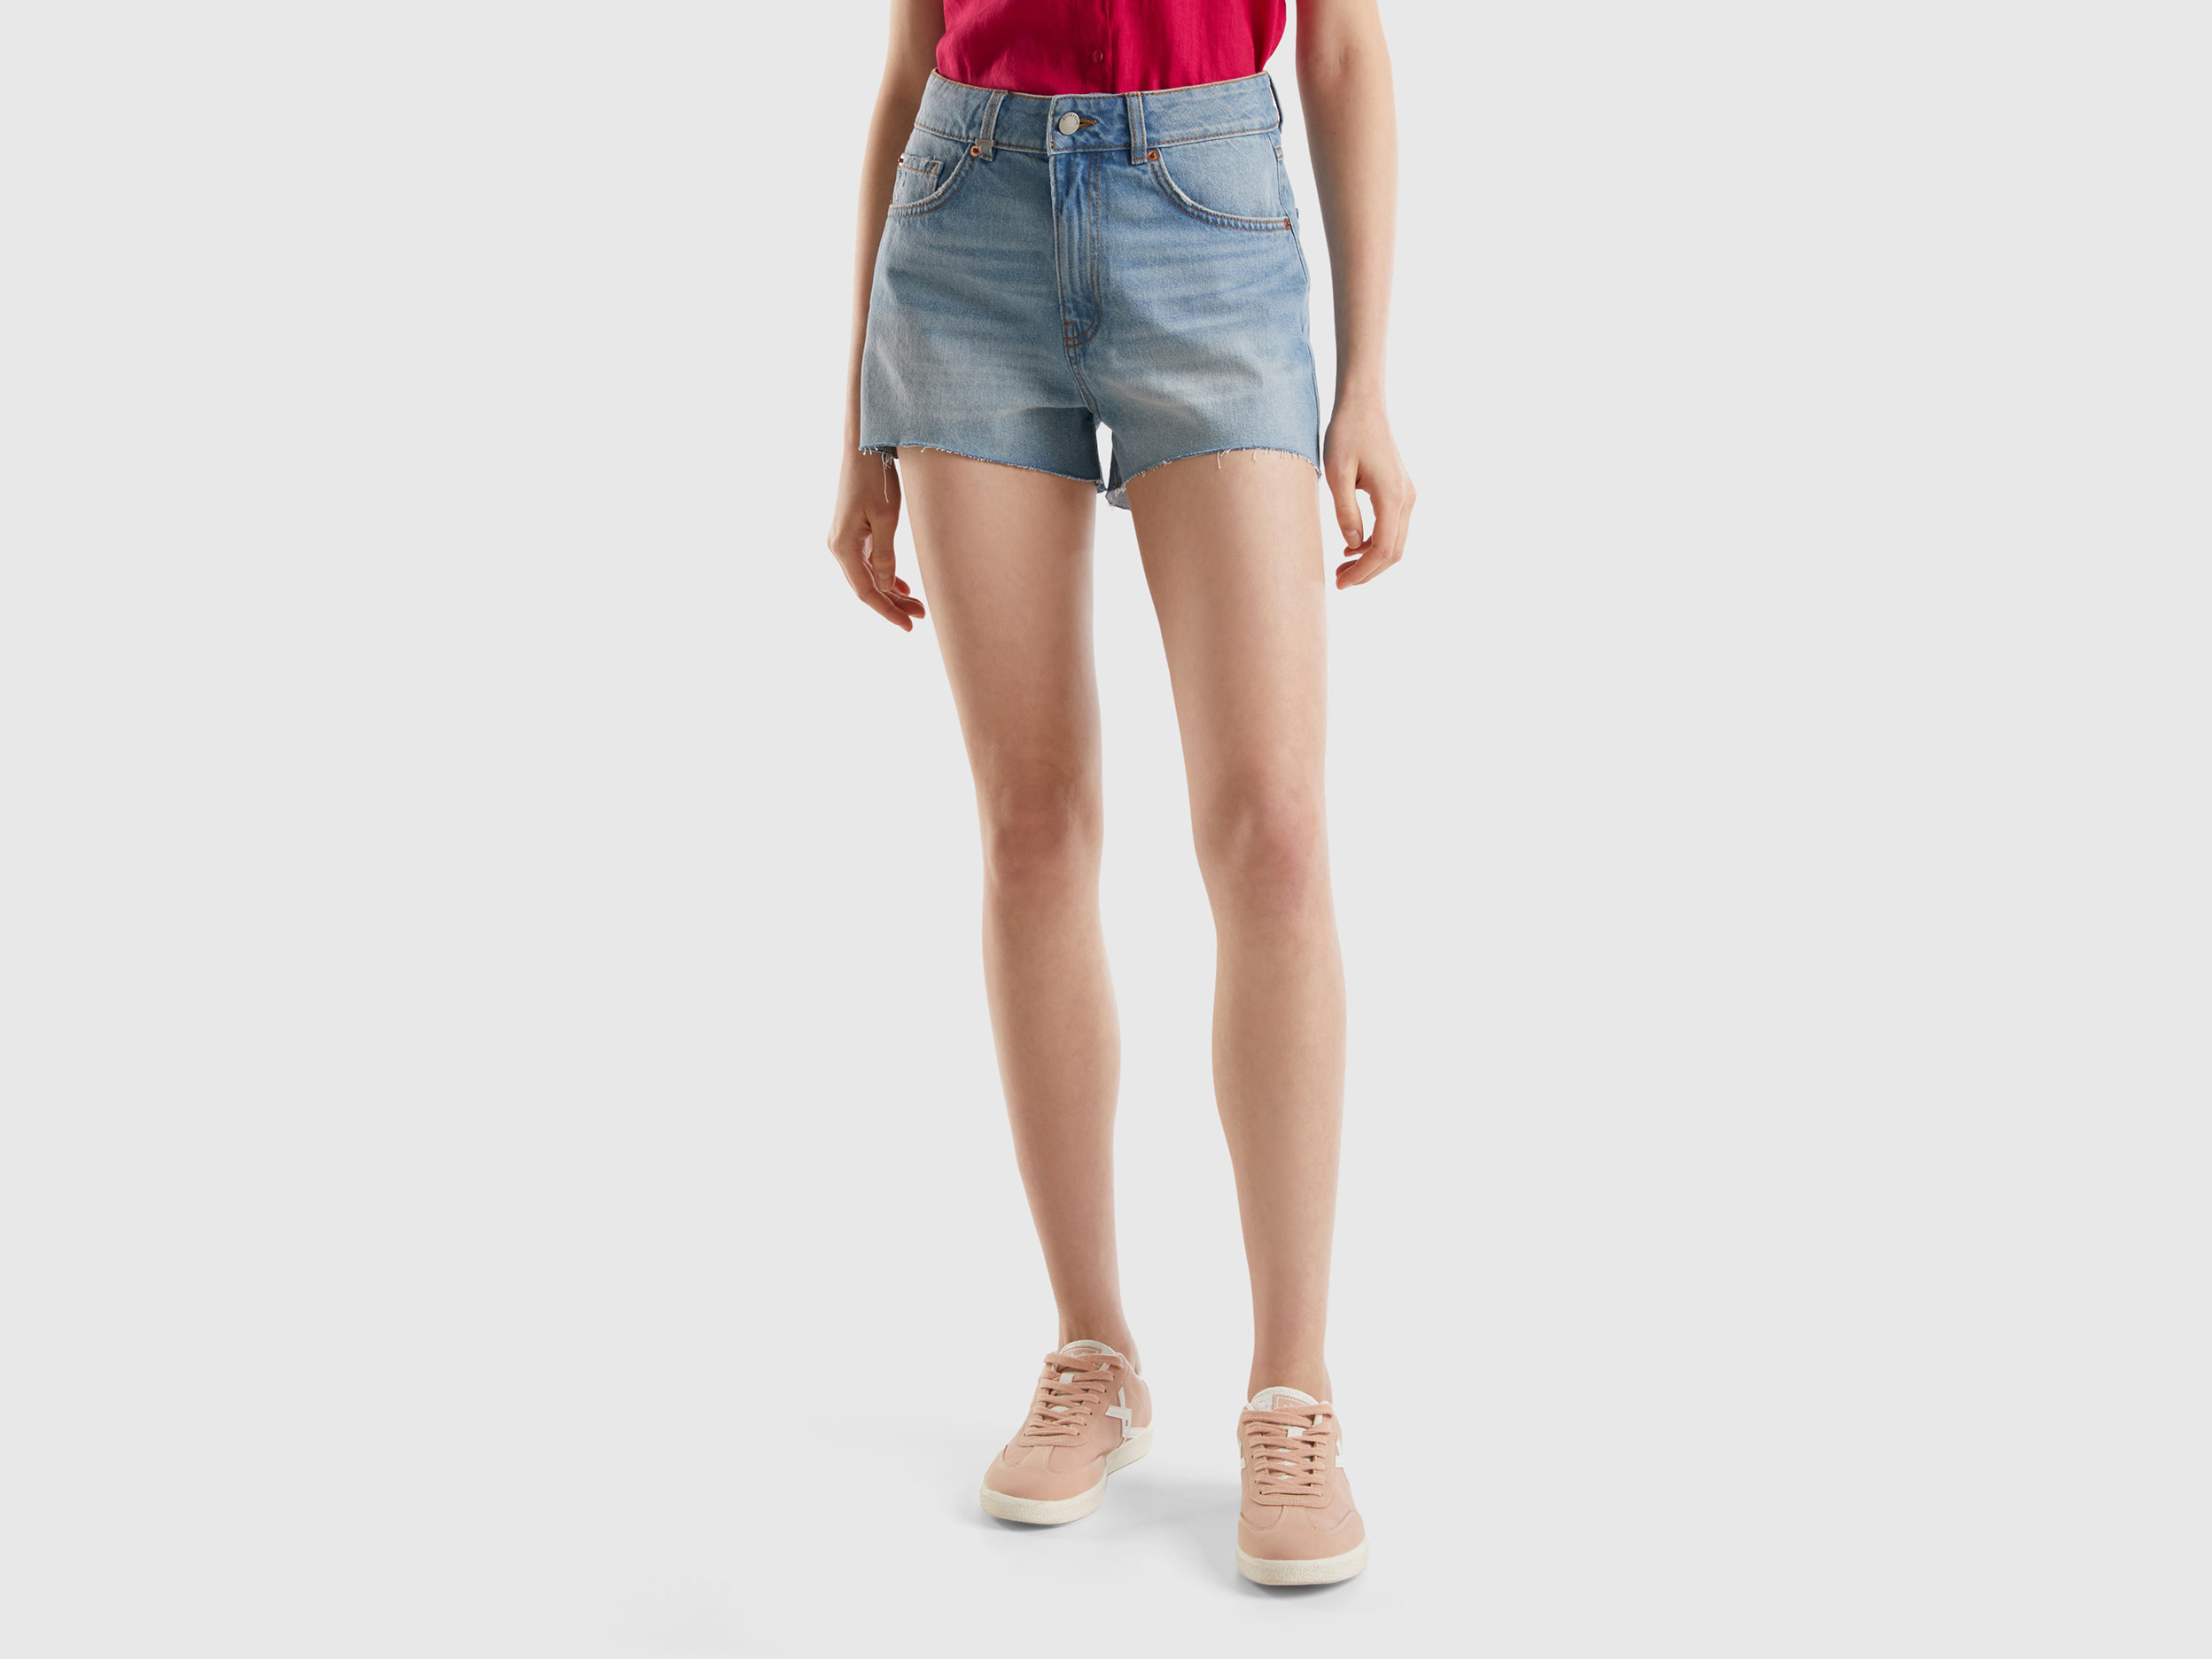 Image of Benetton, Frayed Shorts In Recycled Cotton Blend, size 29, Light Blue, Women